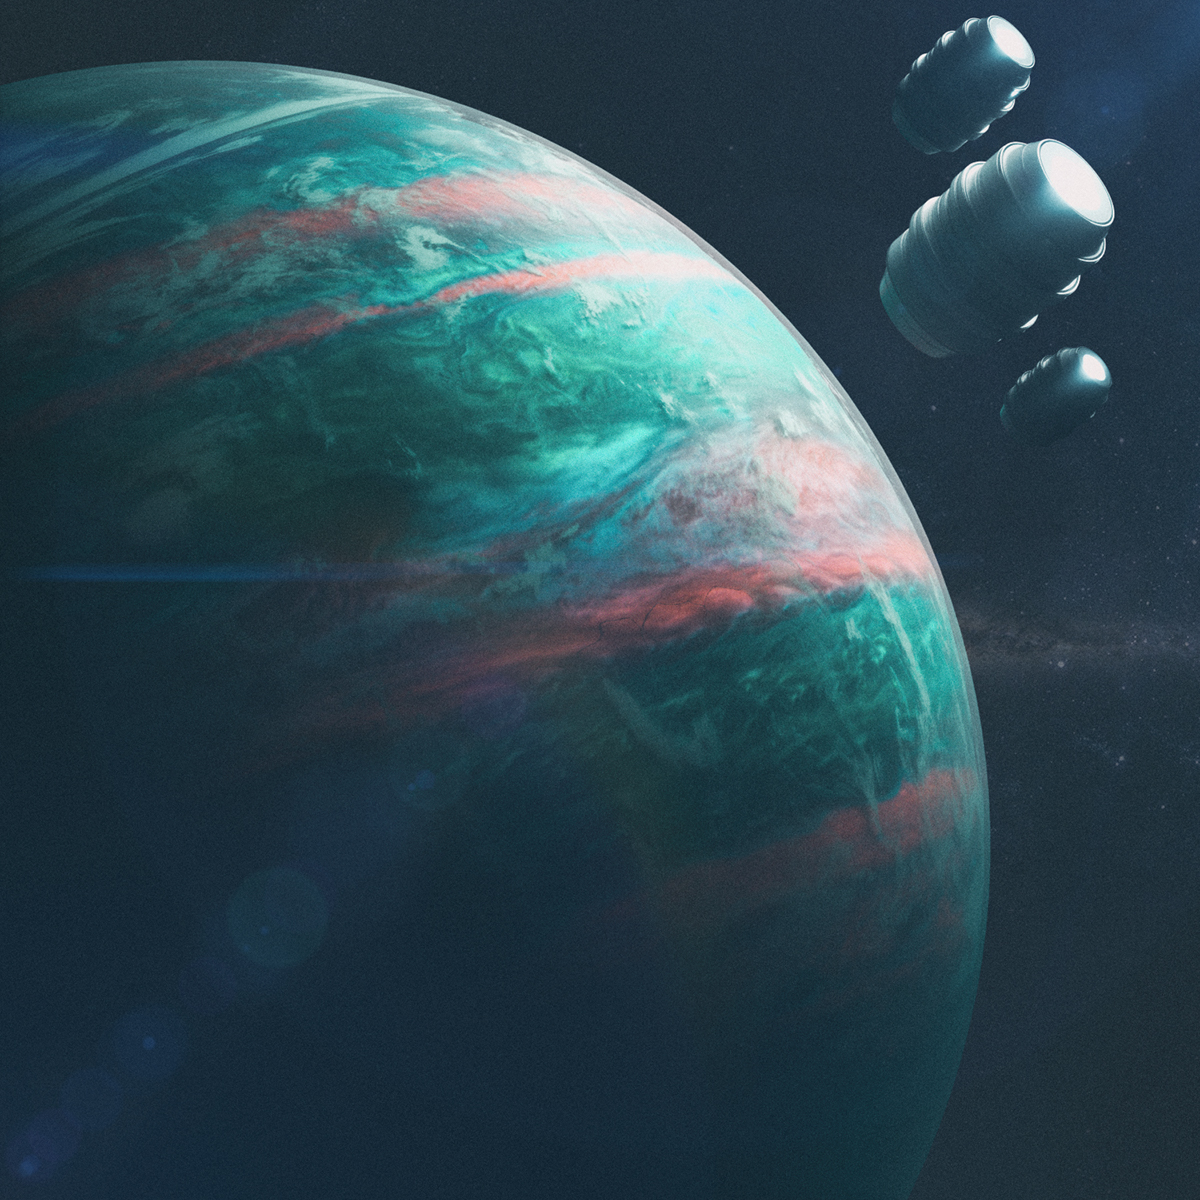 spaceillustrations5